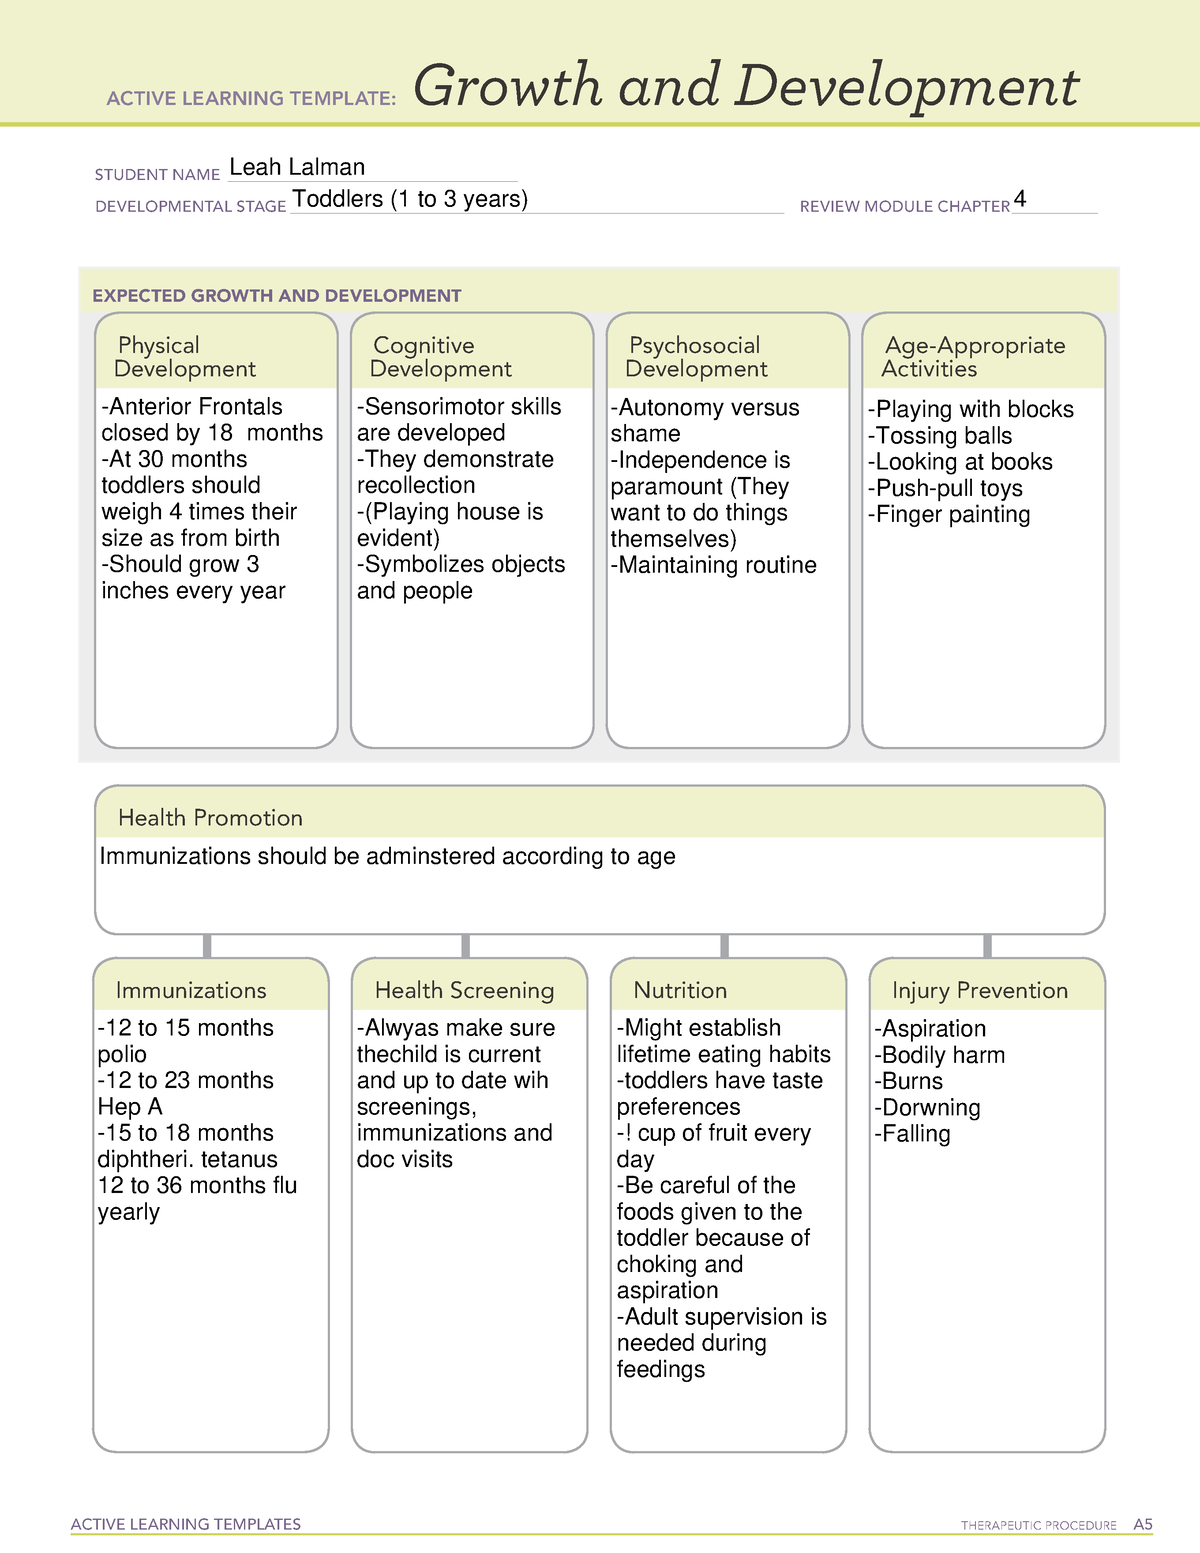 Toddlers Growth and Development ATI template ACTIVE LEARNING